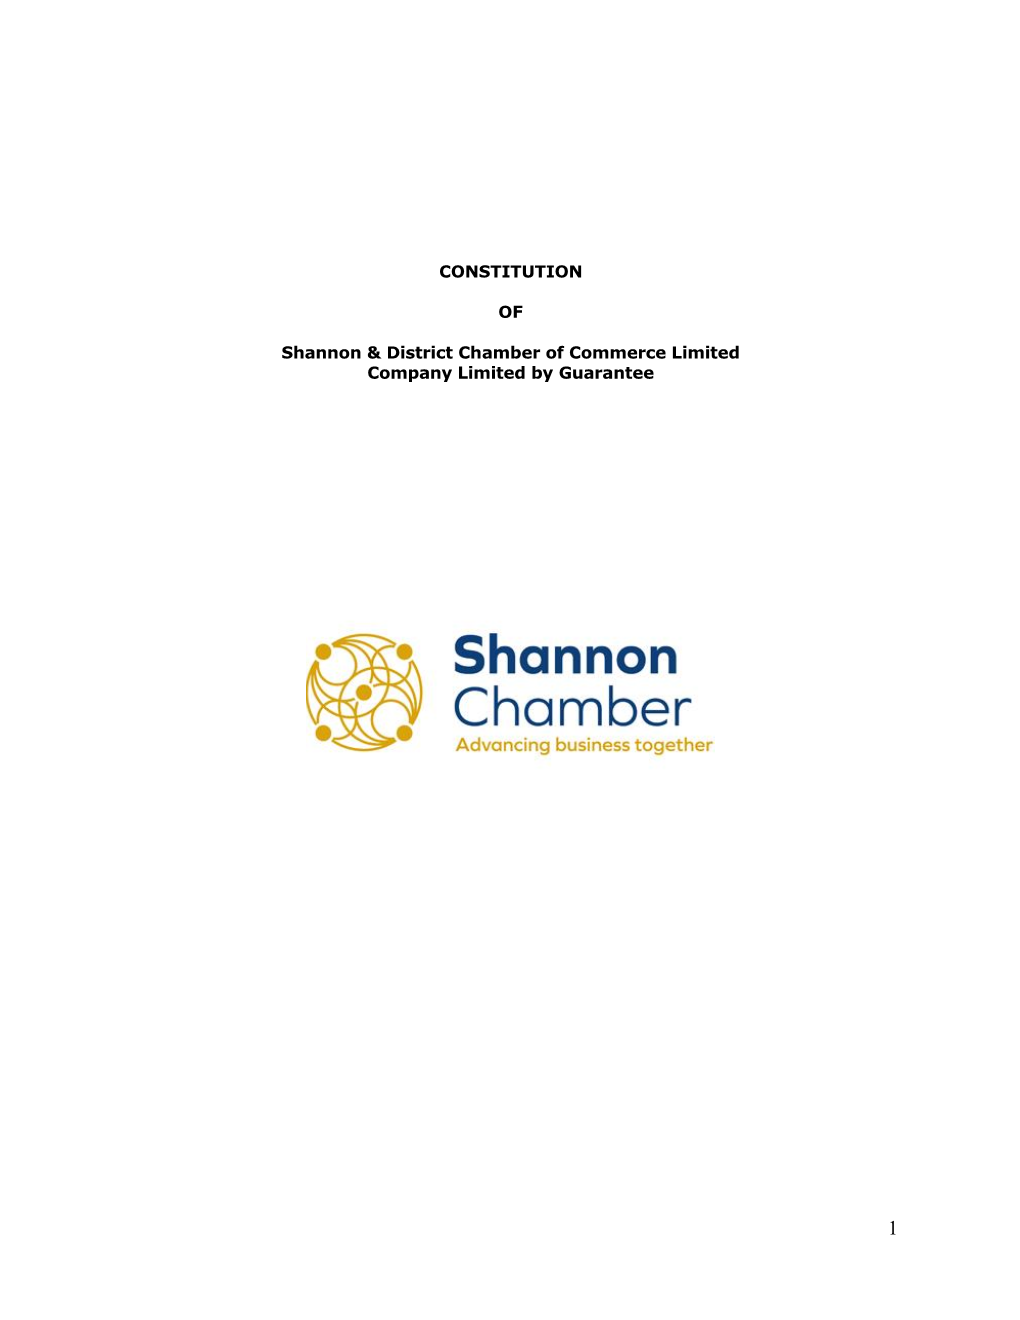 Shannon Chamber Constitution FINAL Jan 2020